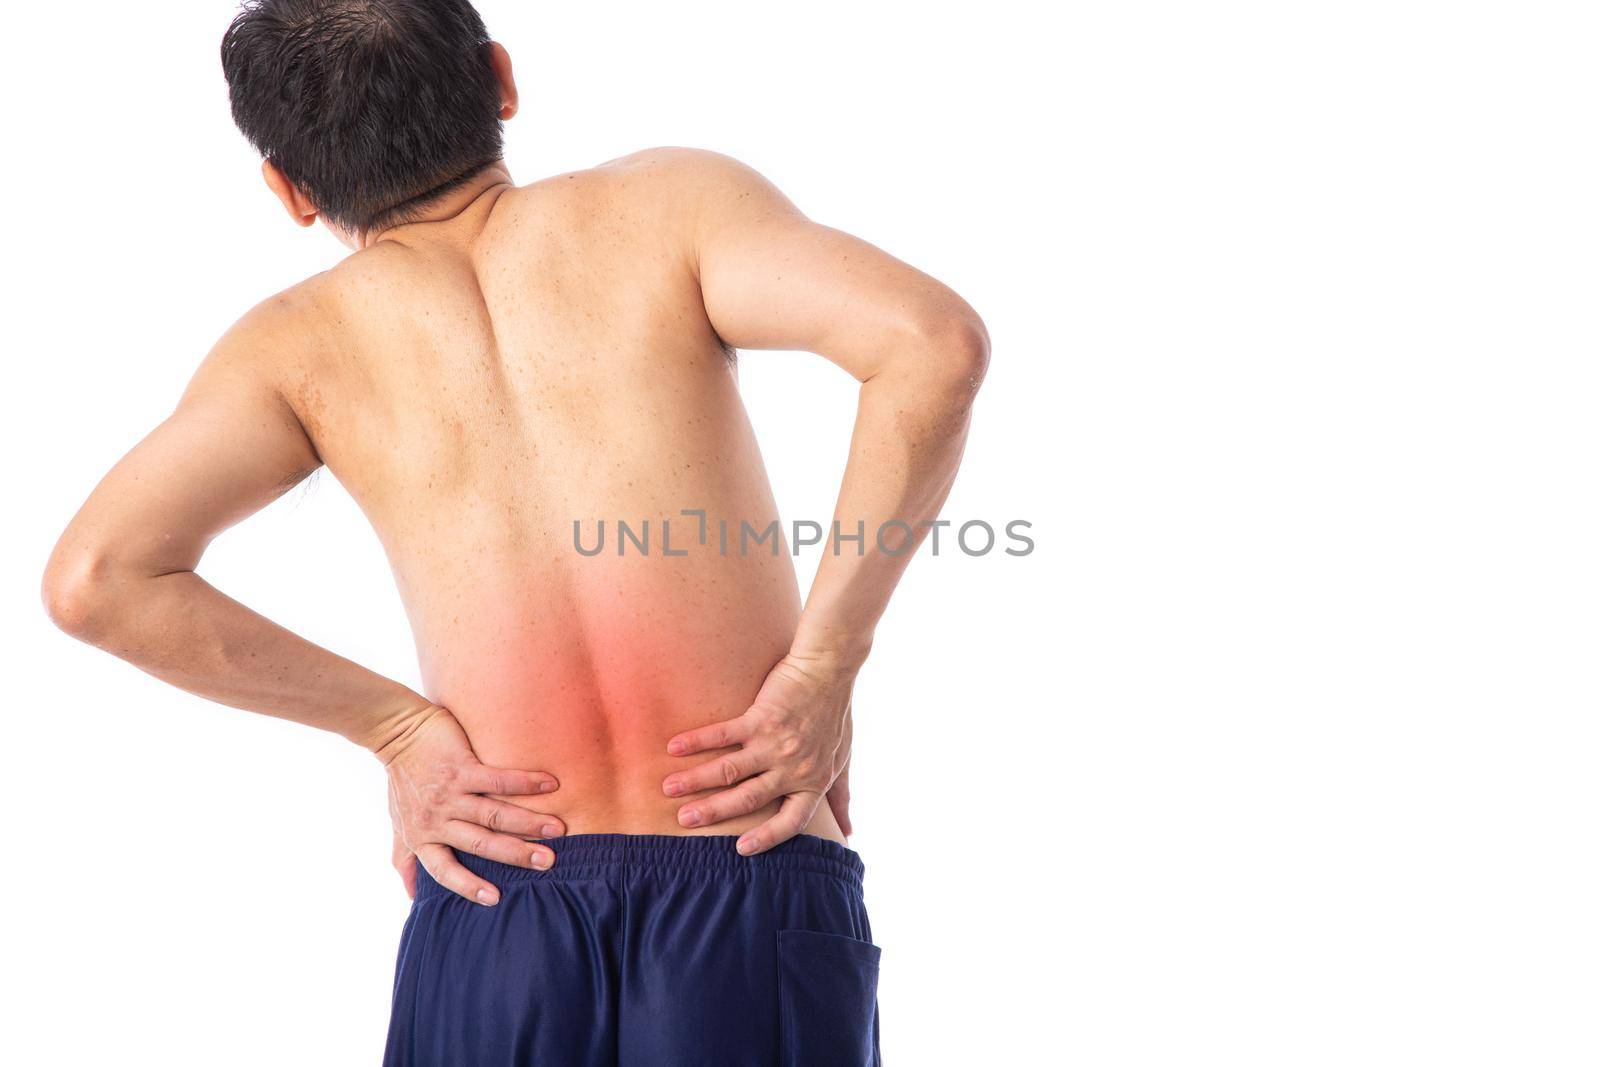 Sore pain of lower back or spine. Sprain and arthritis symptoms. middle age man holding his hurt lower back by tehcheesiong